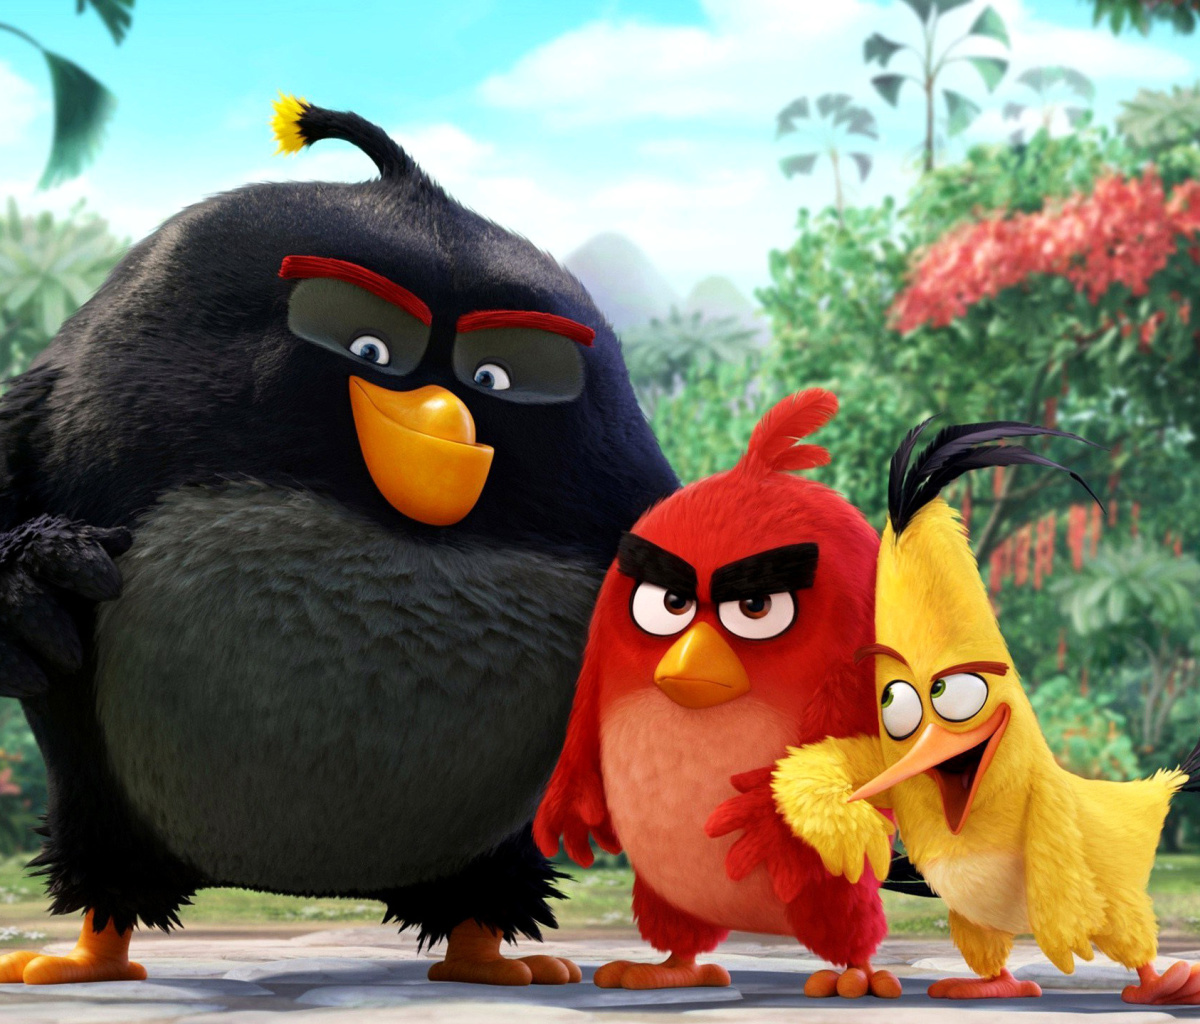 The Angry Birds Comedy Movie 2016 wallpaper 1200x1024